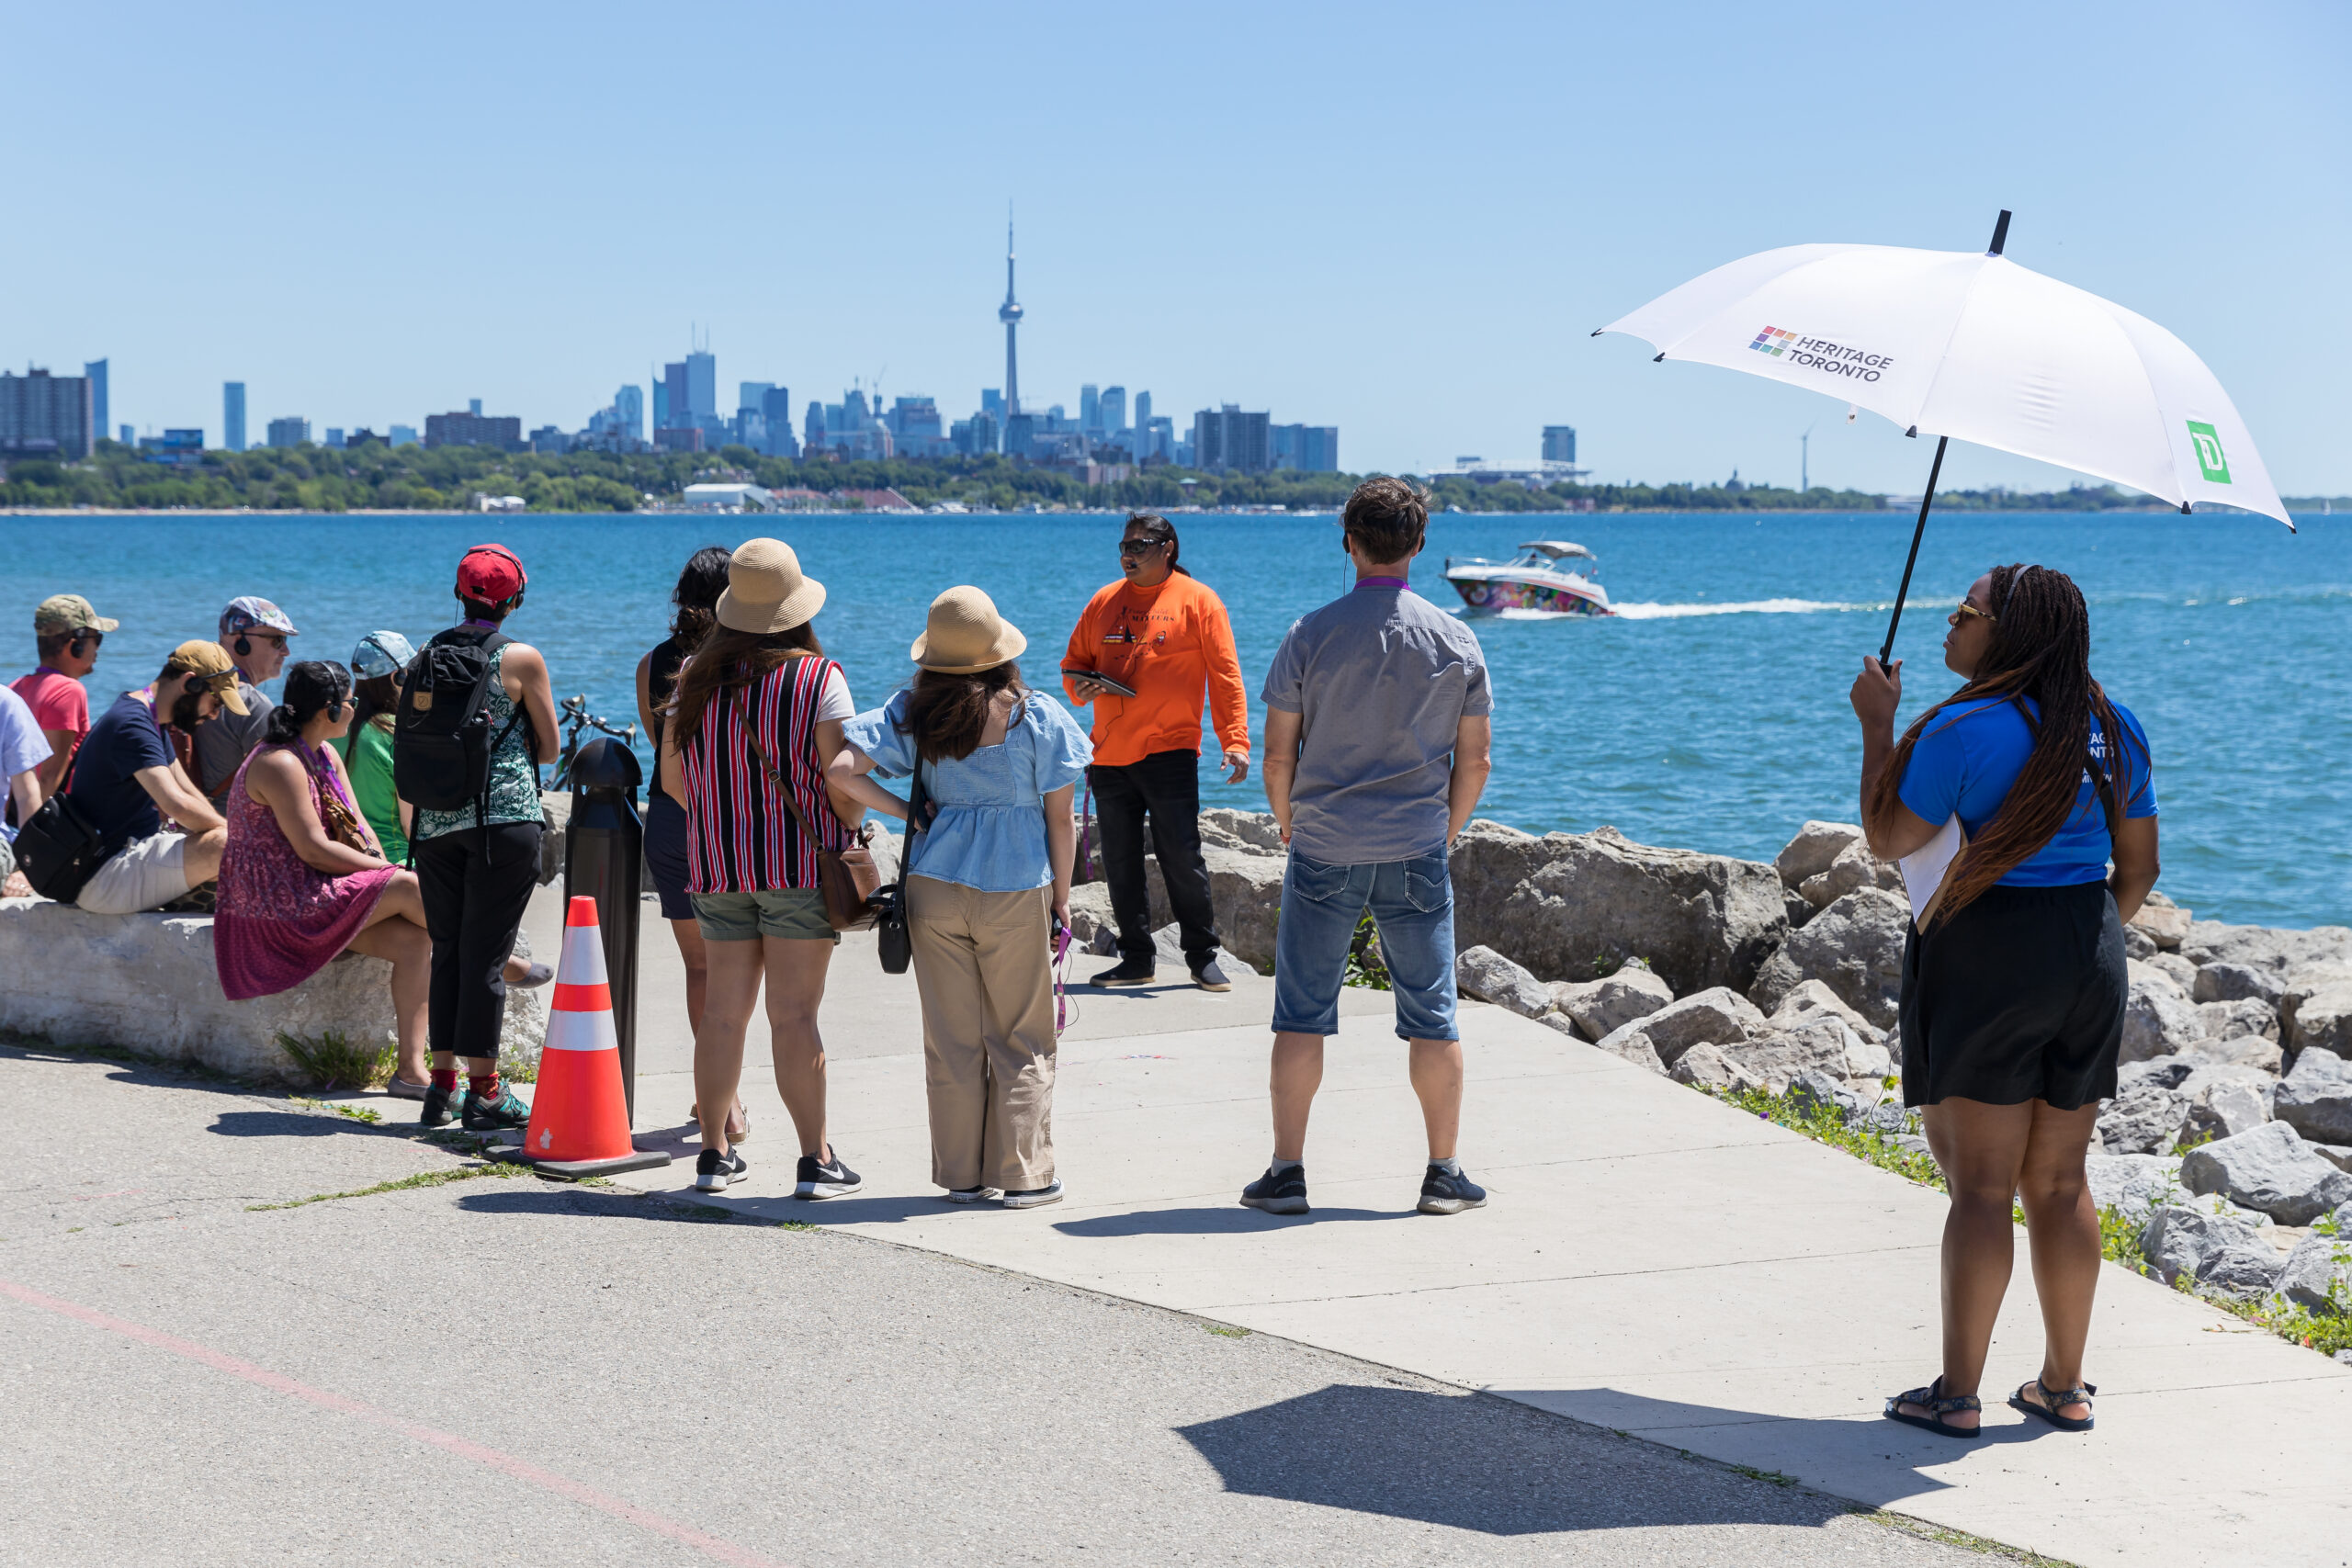 Group of people stand and sit along a path that fronts a waterfront view with a city skyline showing the CN tower behind. A person carrying a white umbrella appears on the right.